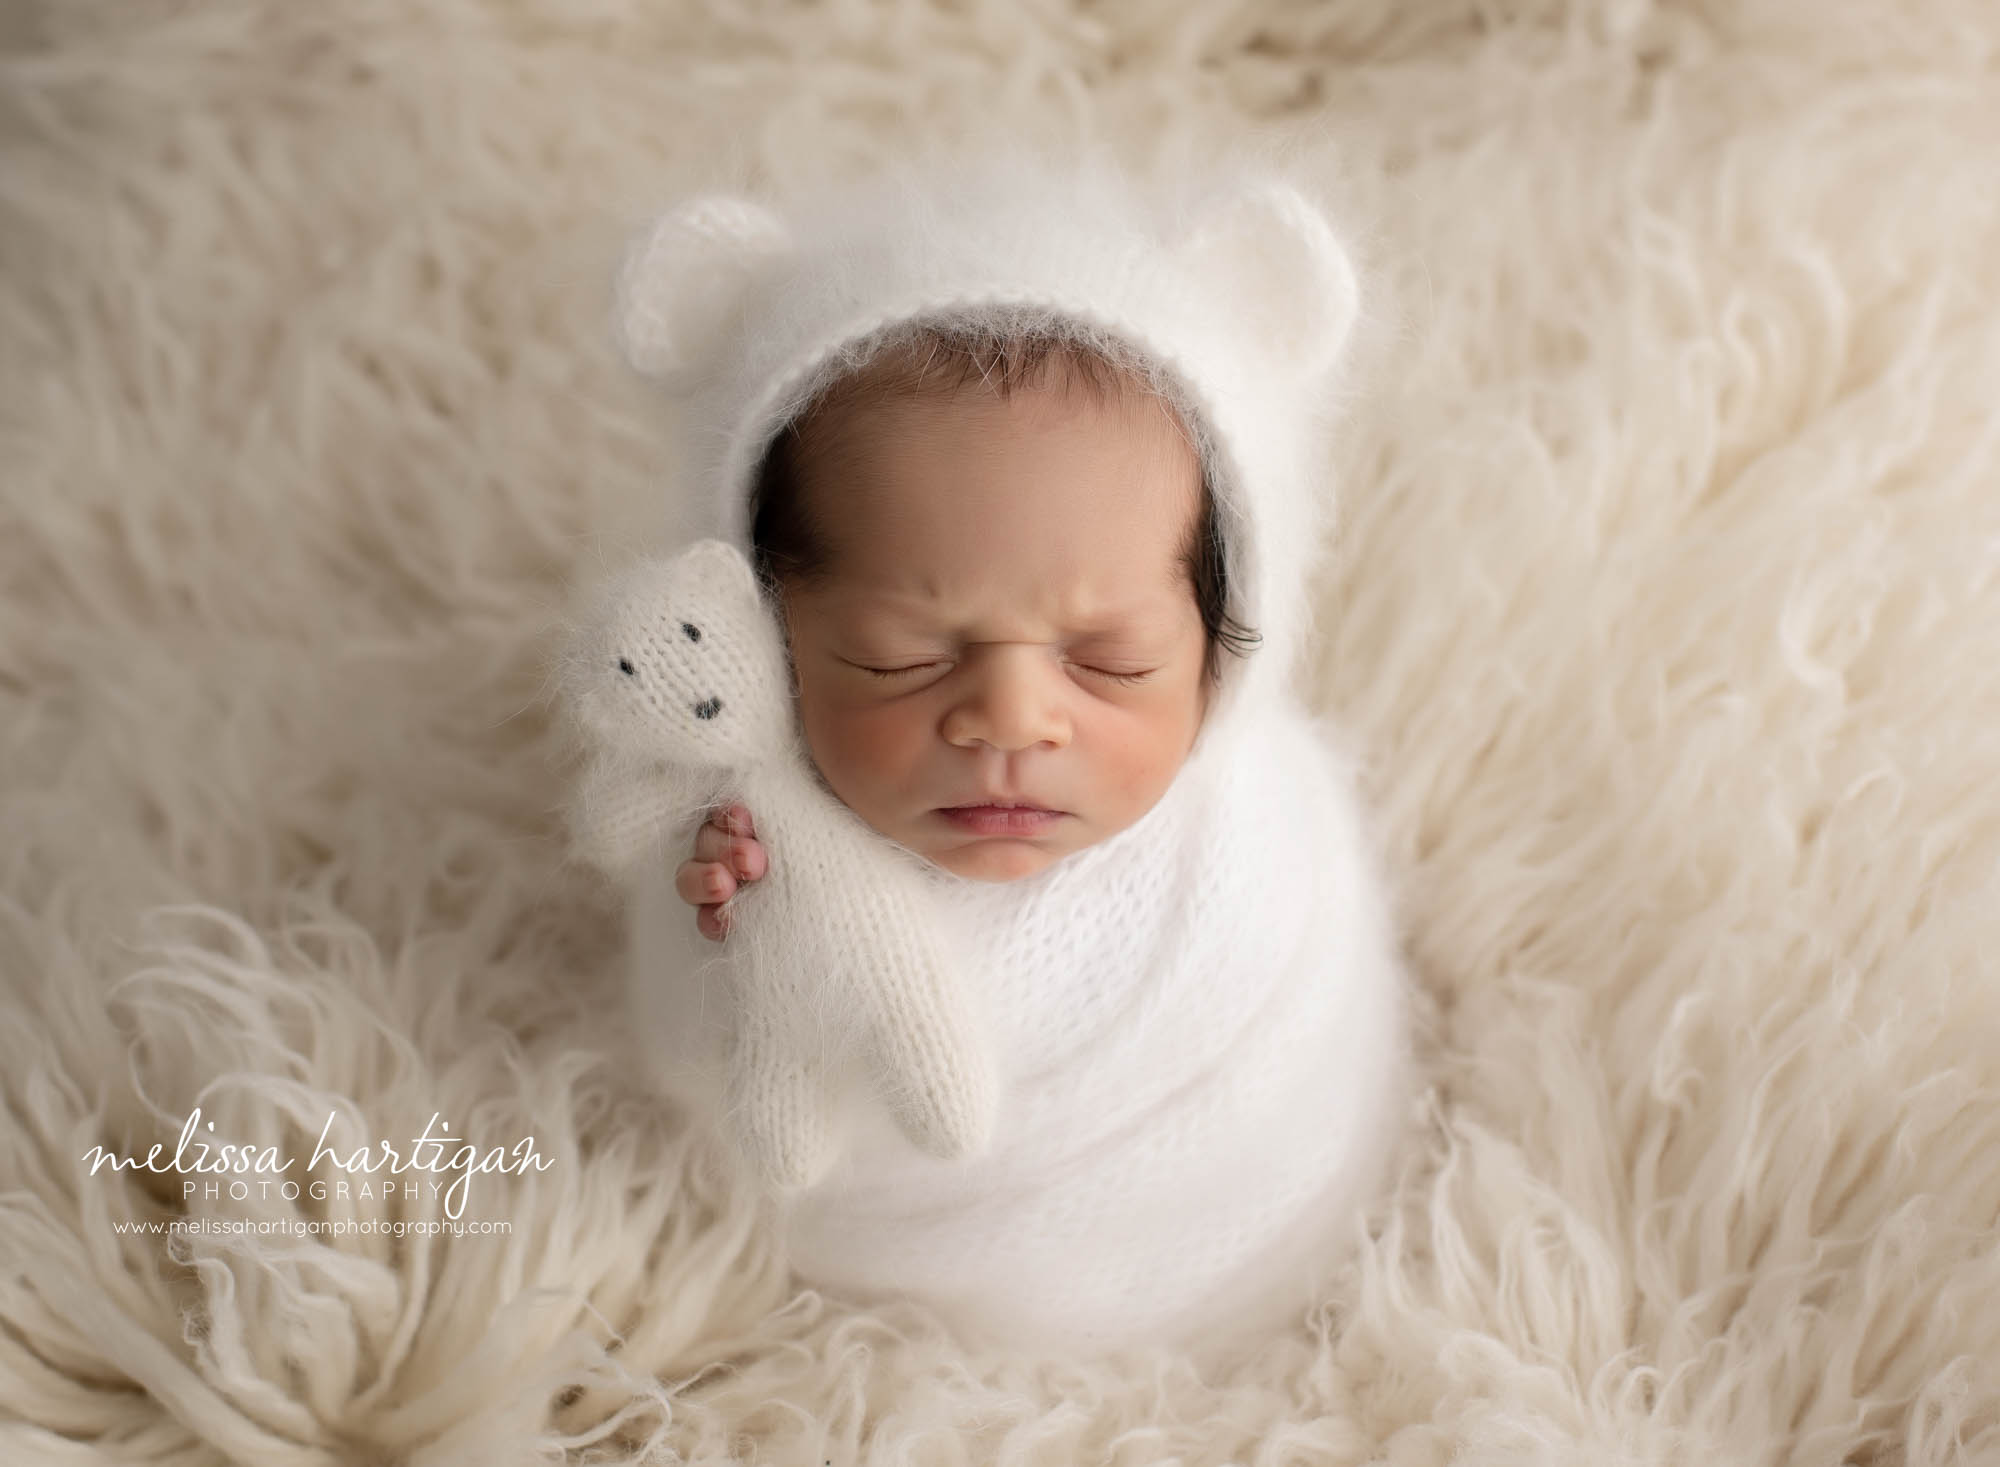 Newborn baby boy wrapped in white knitted wrap with matching teddy bear and bear bonnet